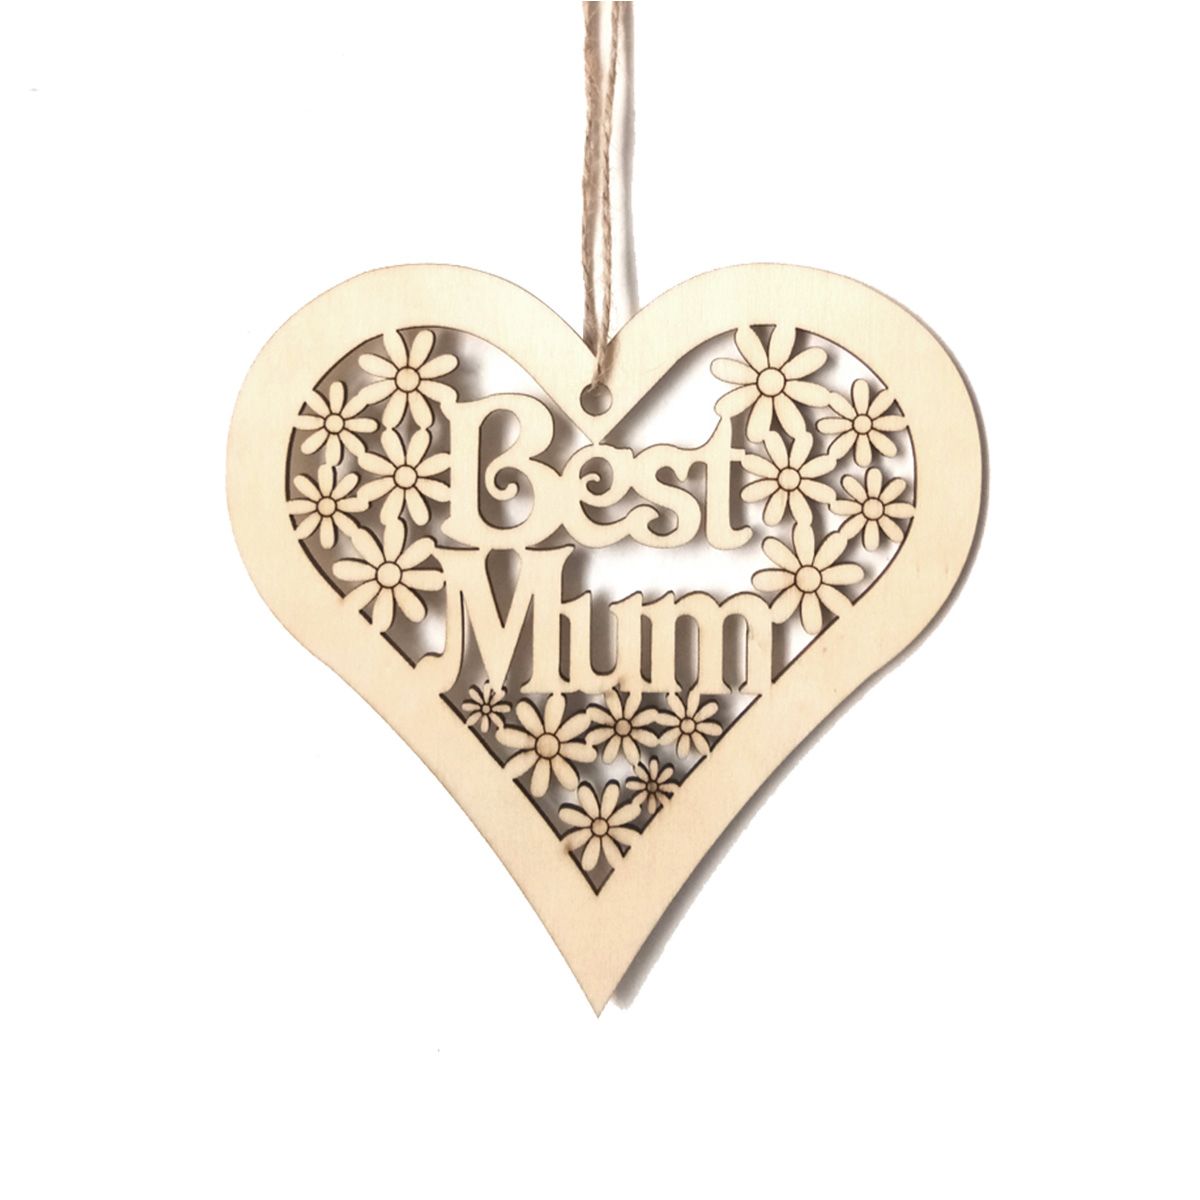 10cm-Wooden-Plaque-Mum-Heart-Shape-Flowers-Mothers-Day-Hanging-Decorations-Craft-Gift-1464275